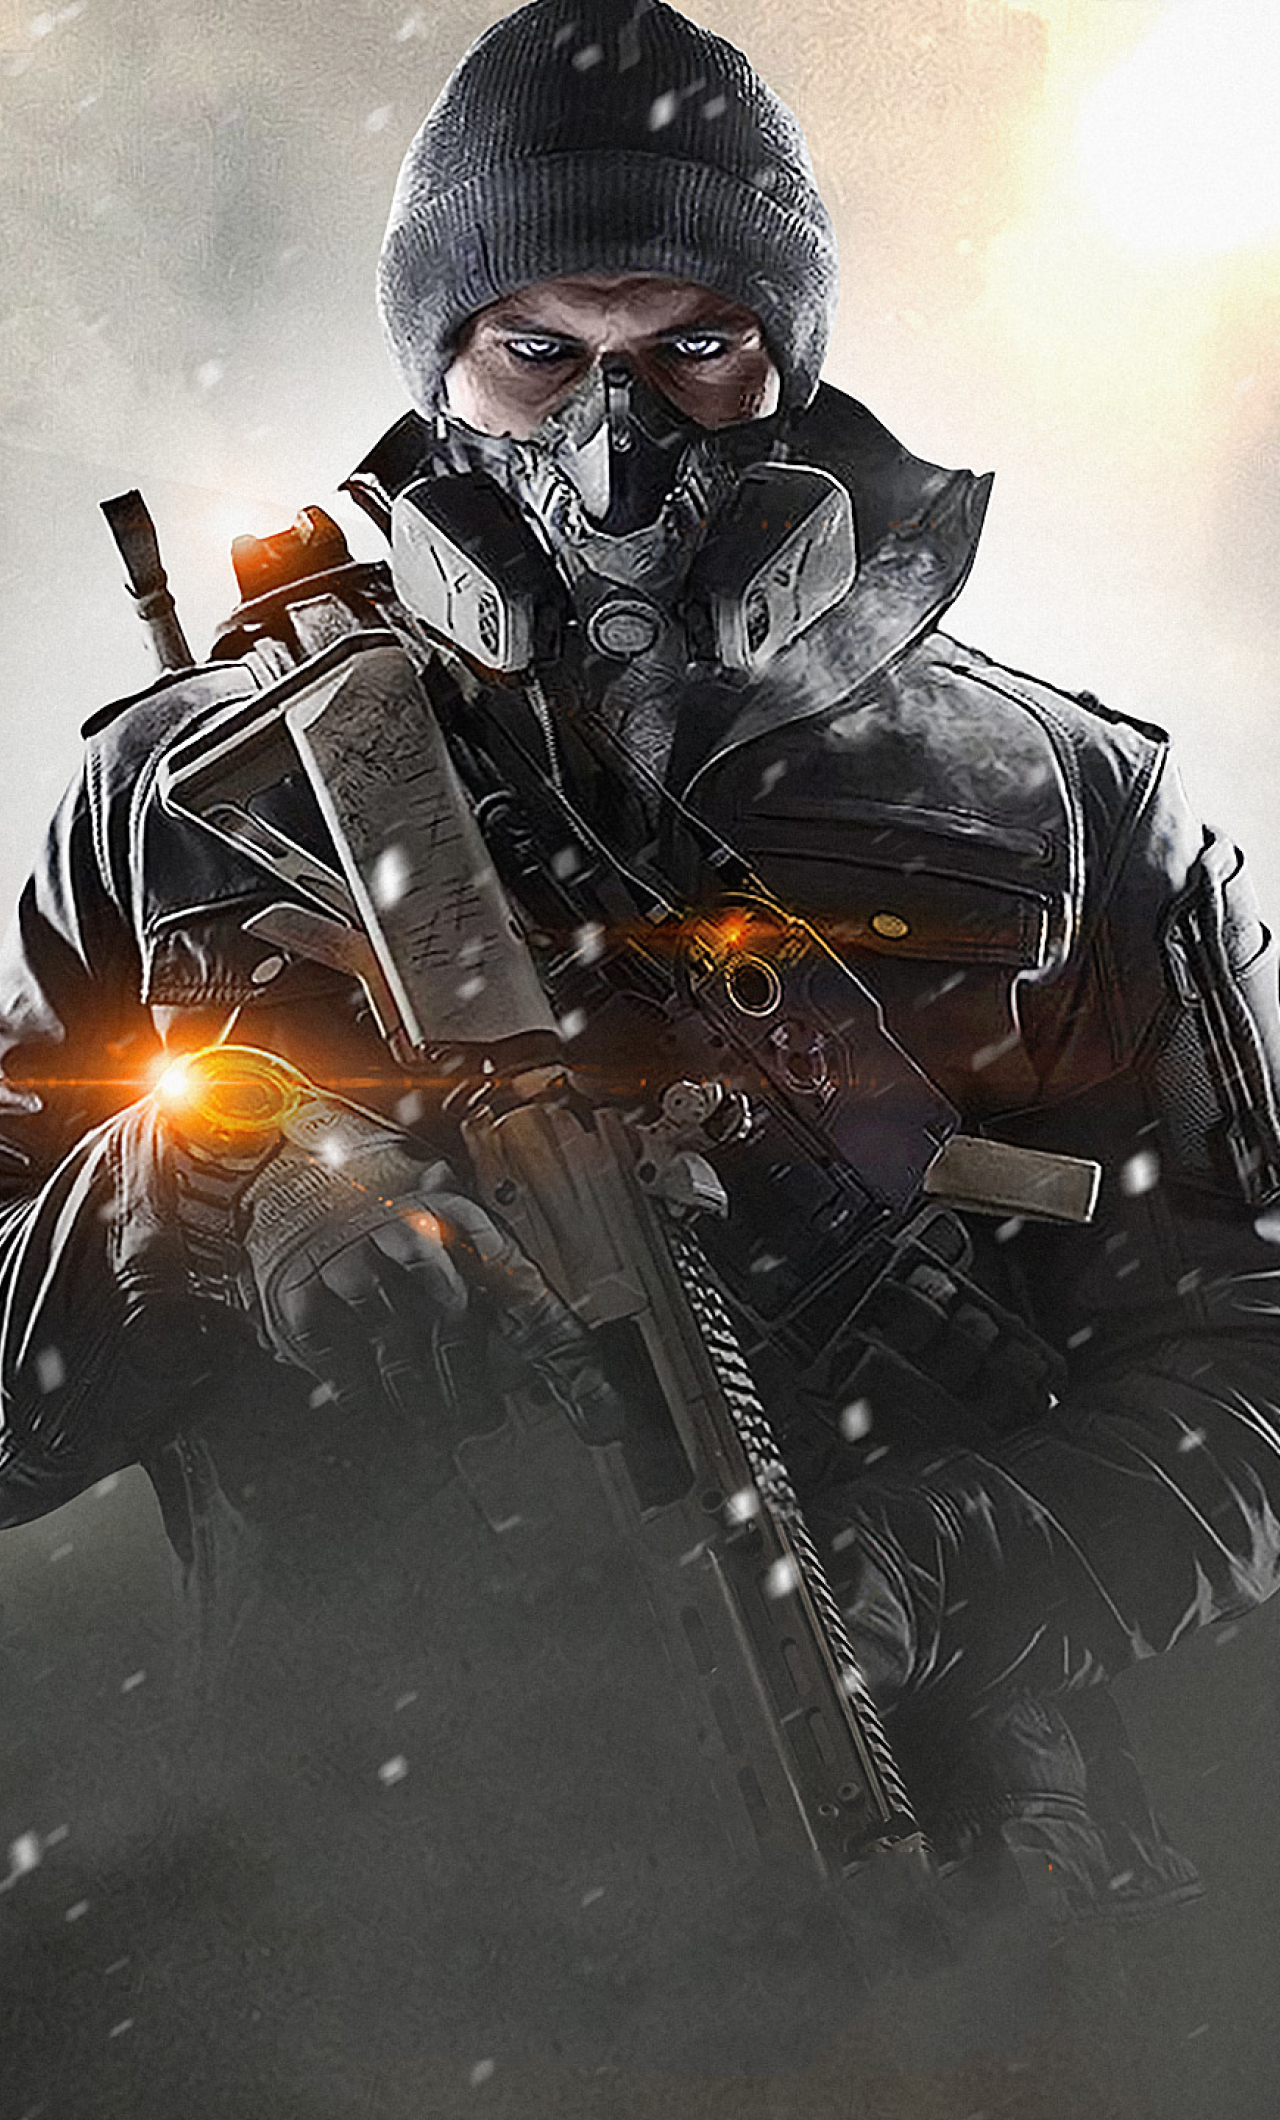 1280x21 Tom Clancy S The Division Iphone 6 Plus Wallpaper Hd Games 4k Wallpapers Images Photos And Background Wallpapers Den